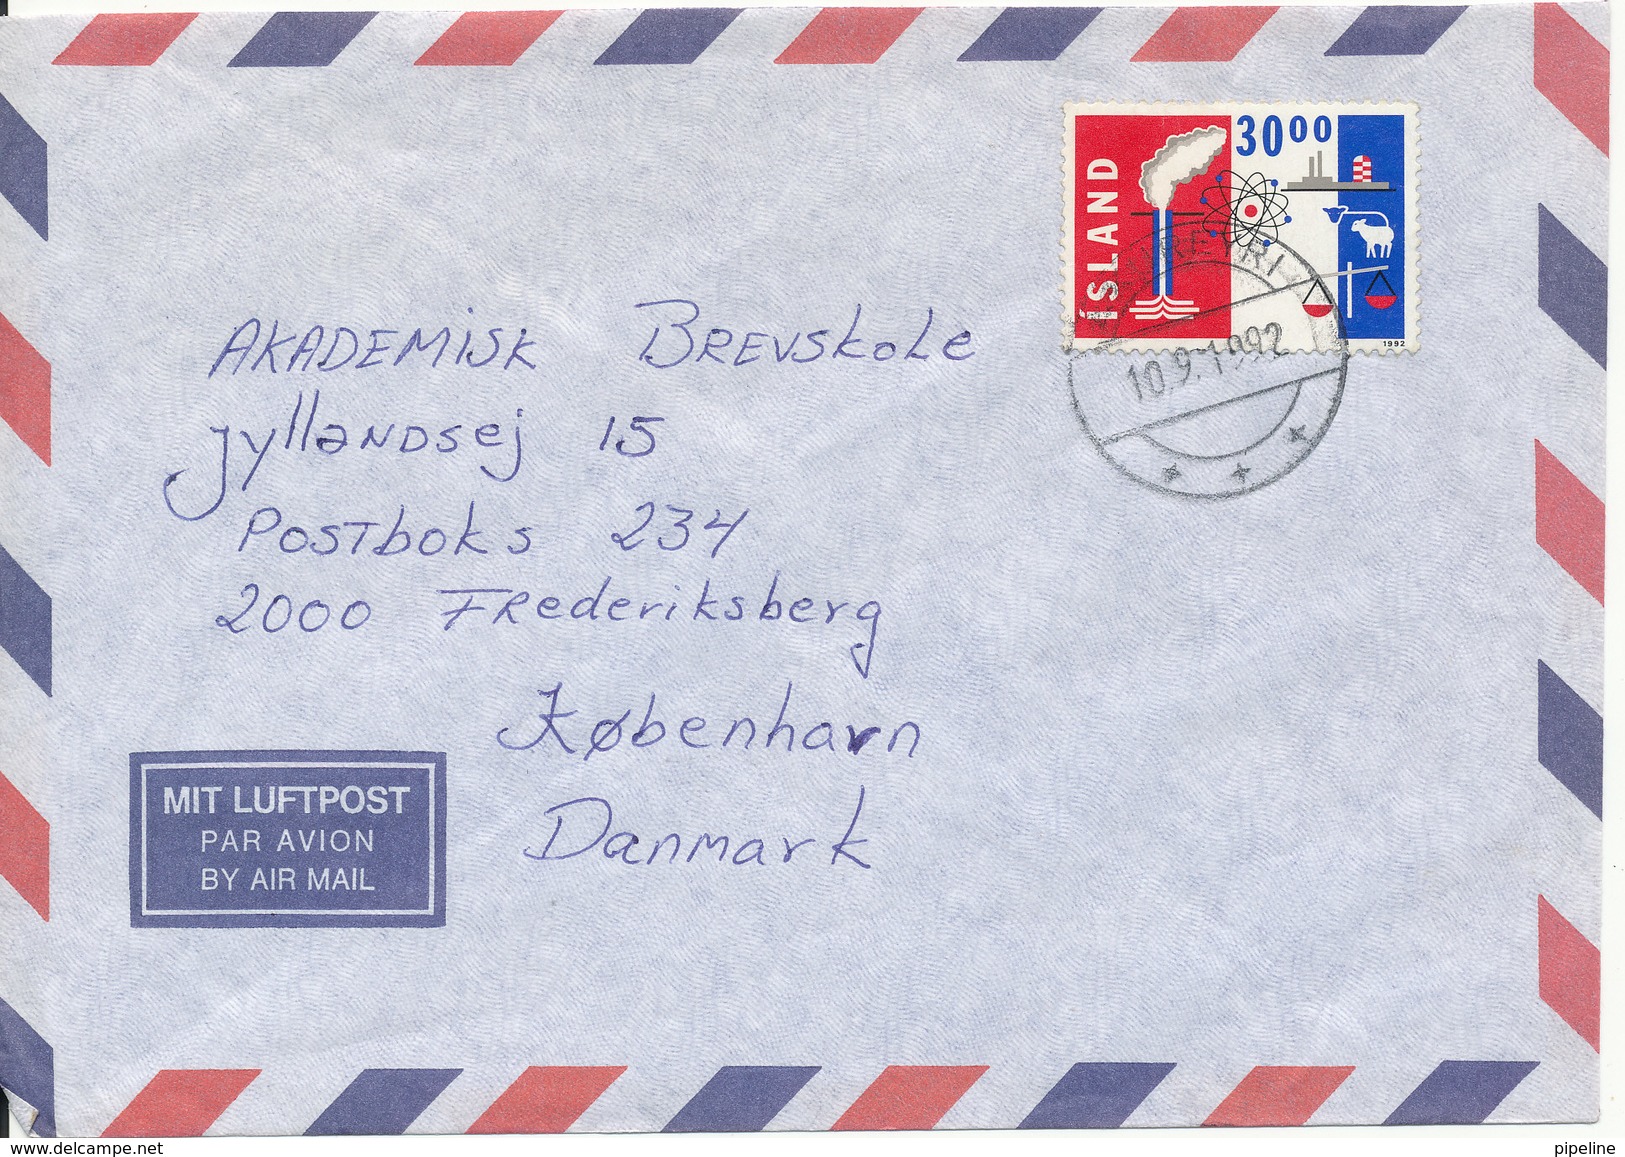 Iceland Air Mail Cover Sent To Denmark 10-9-1992 Single Franked - Luchtpost